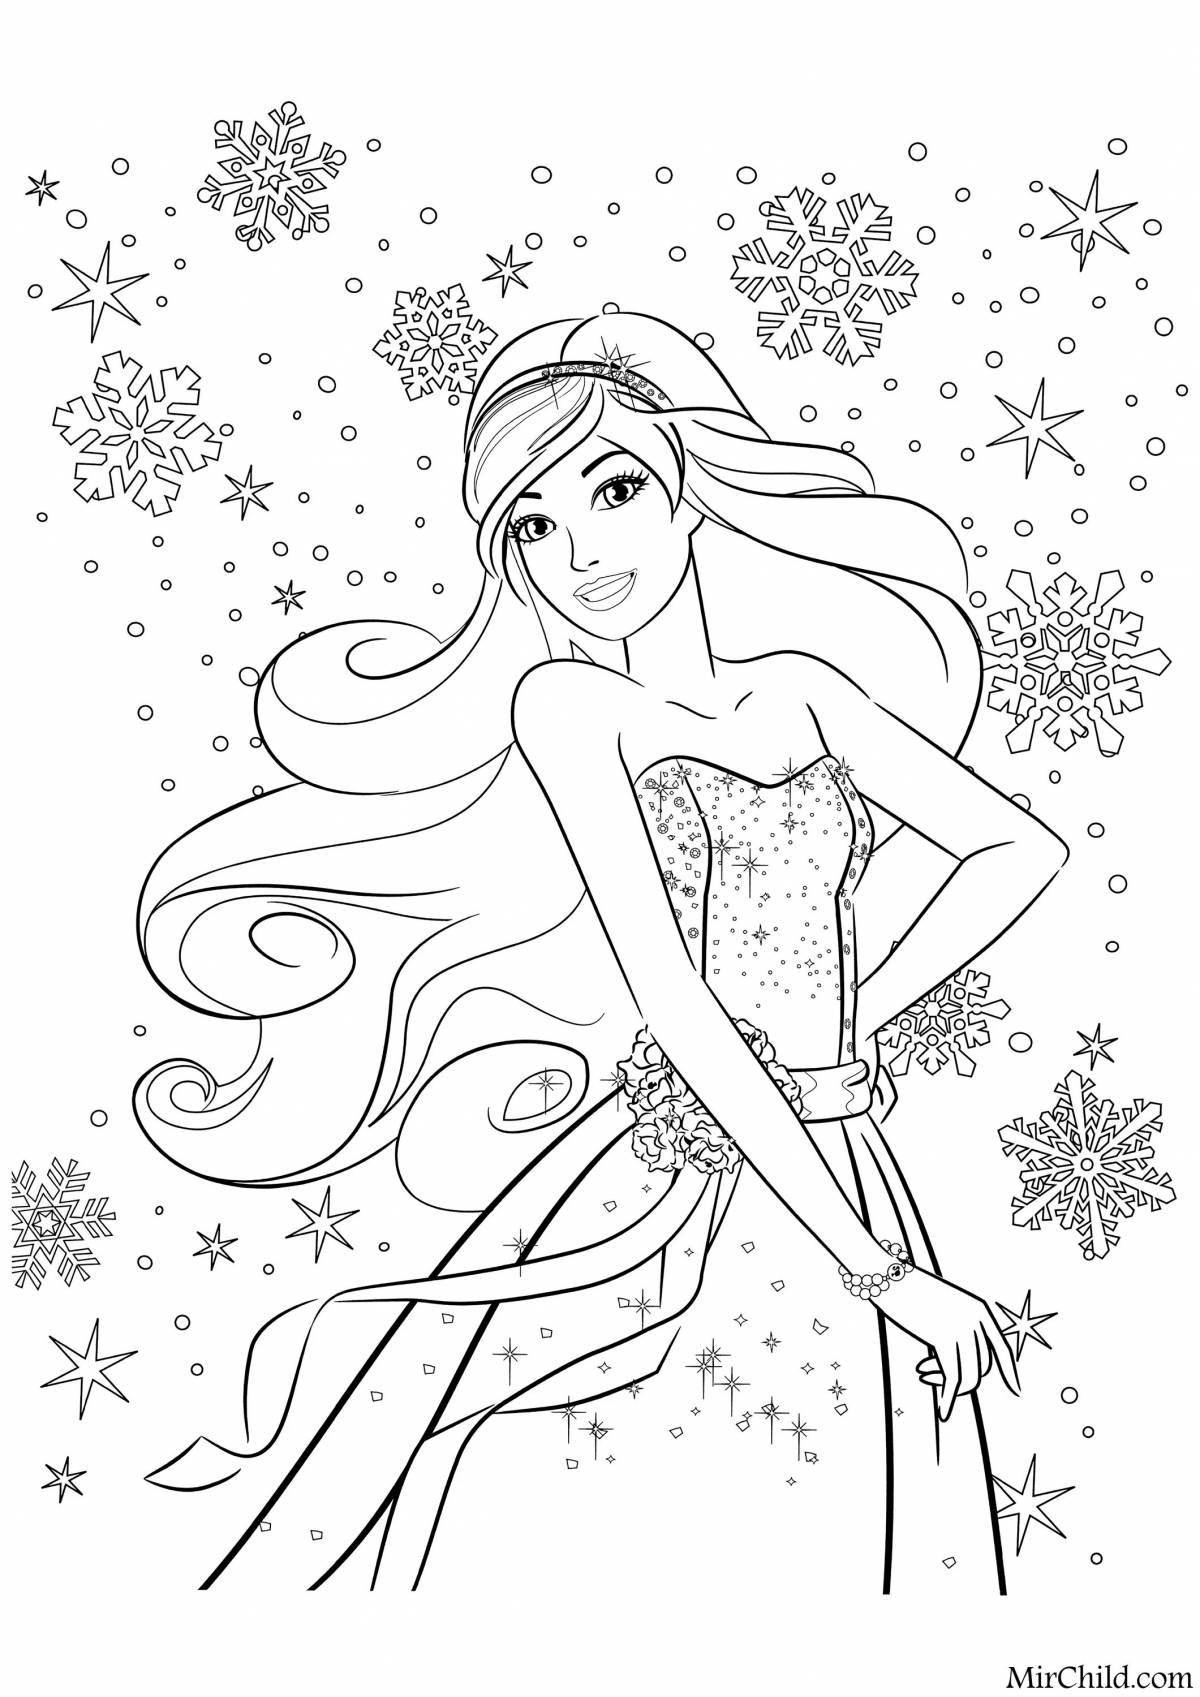 Exquisite Barbie Christmas coloring book